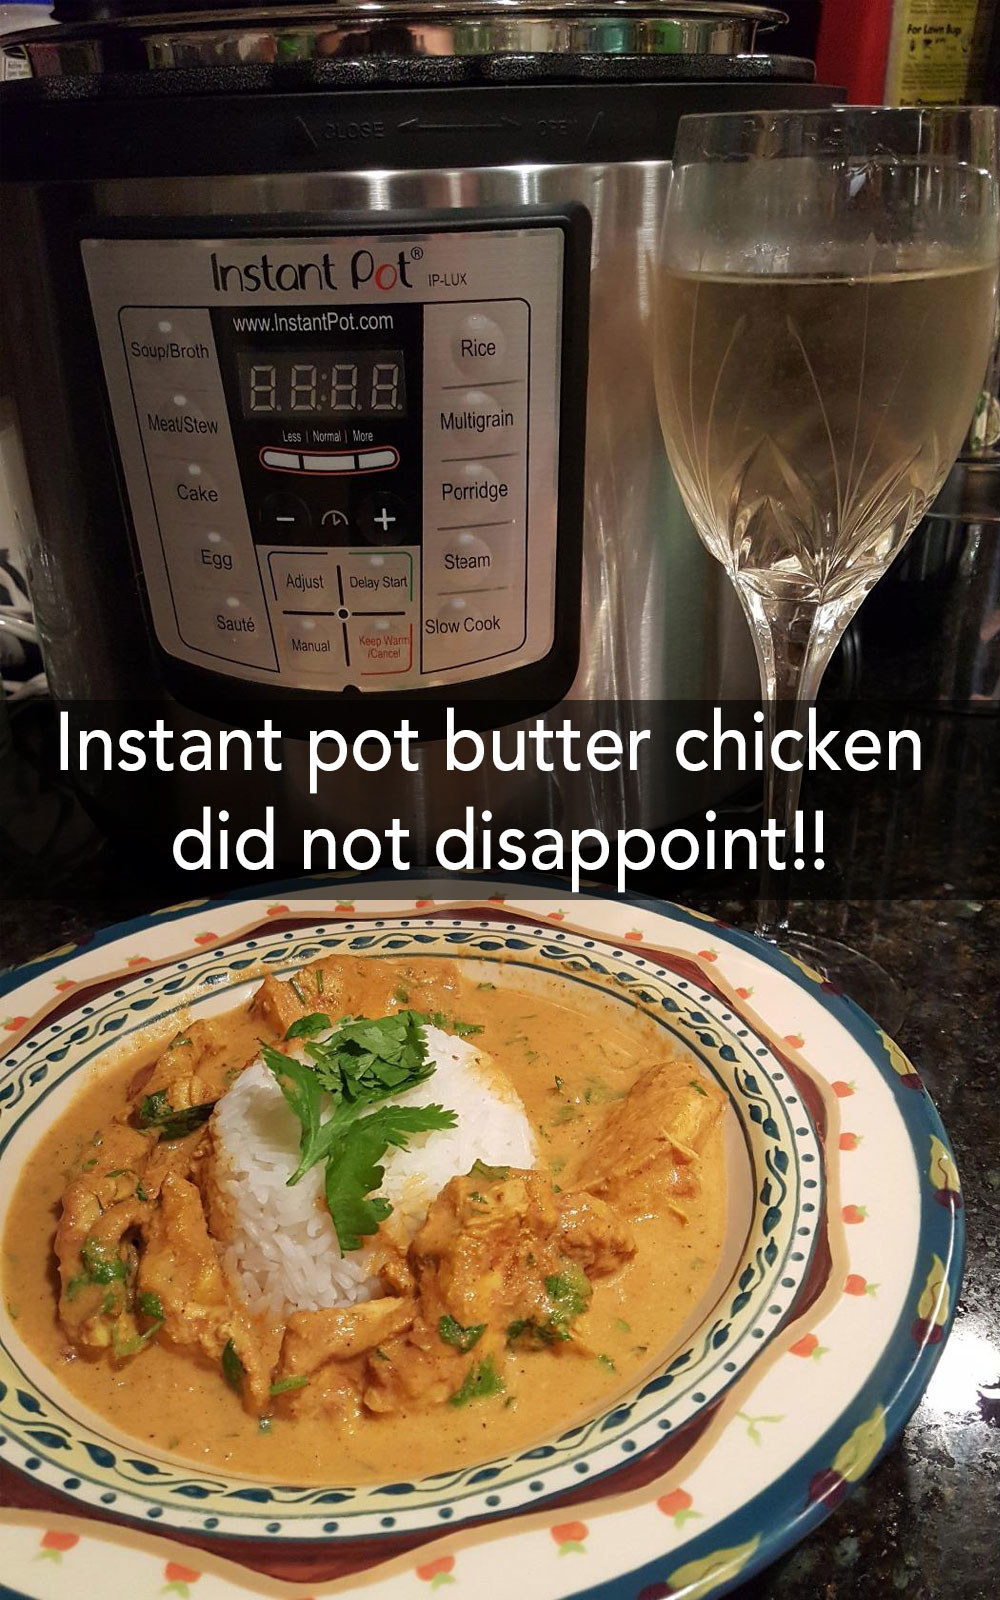 A reviewer&#x27;s Instant pot and butter chicken with text that says it didn&#x27;t disappoint